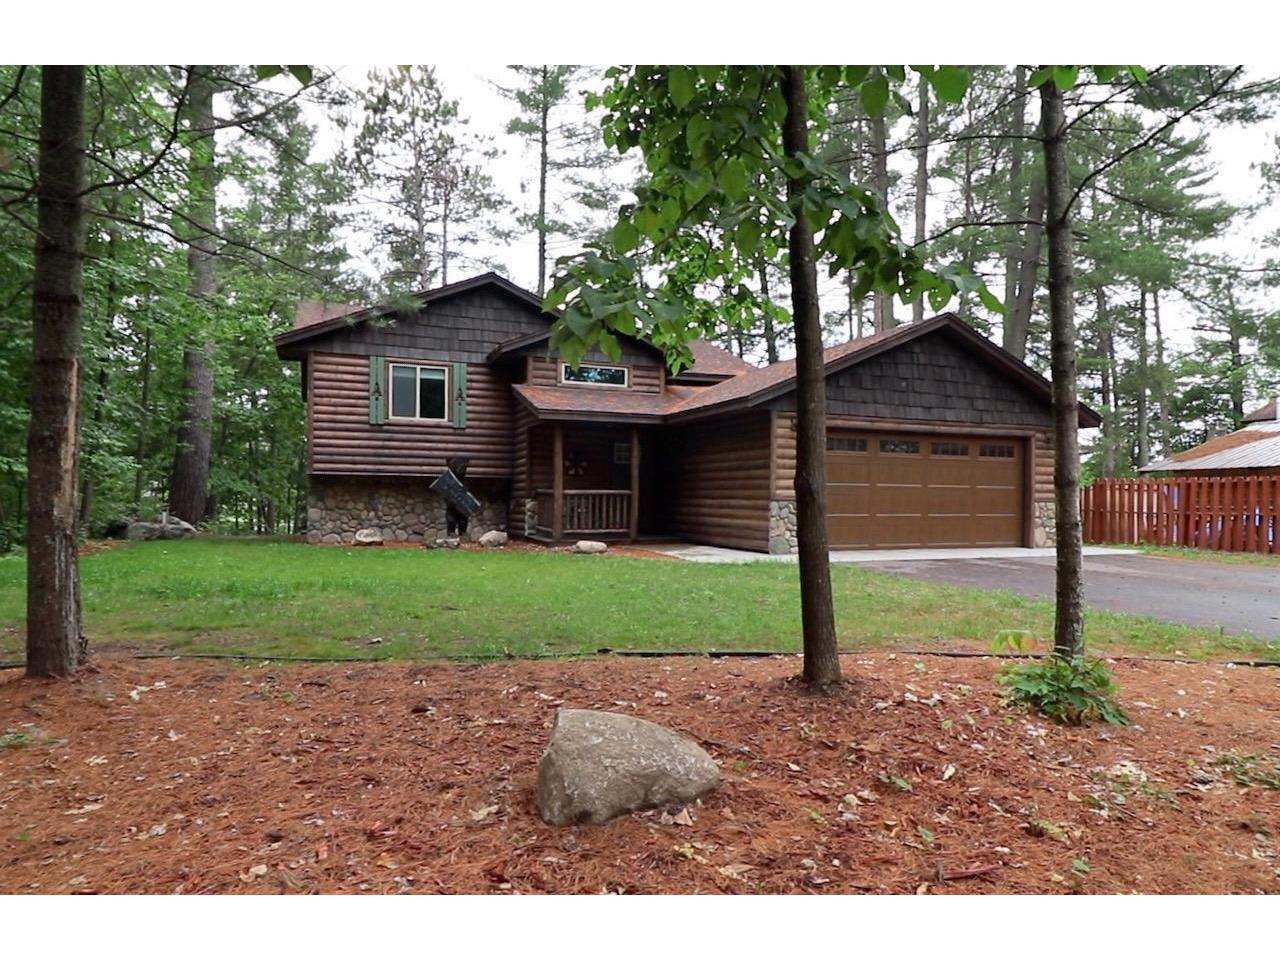 2021 White Pine Point Trail SW Pine River MN 56474 - Norway 6028374 image1